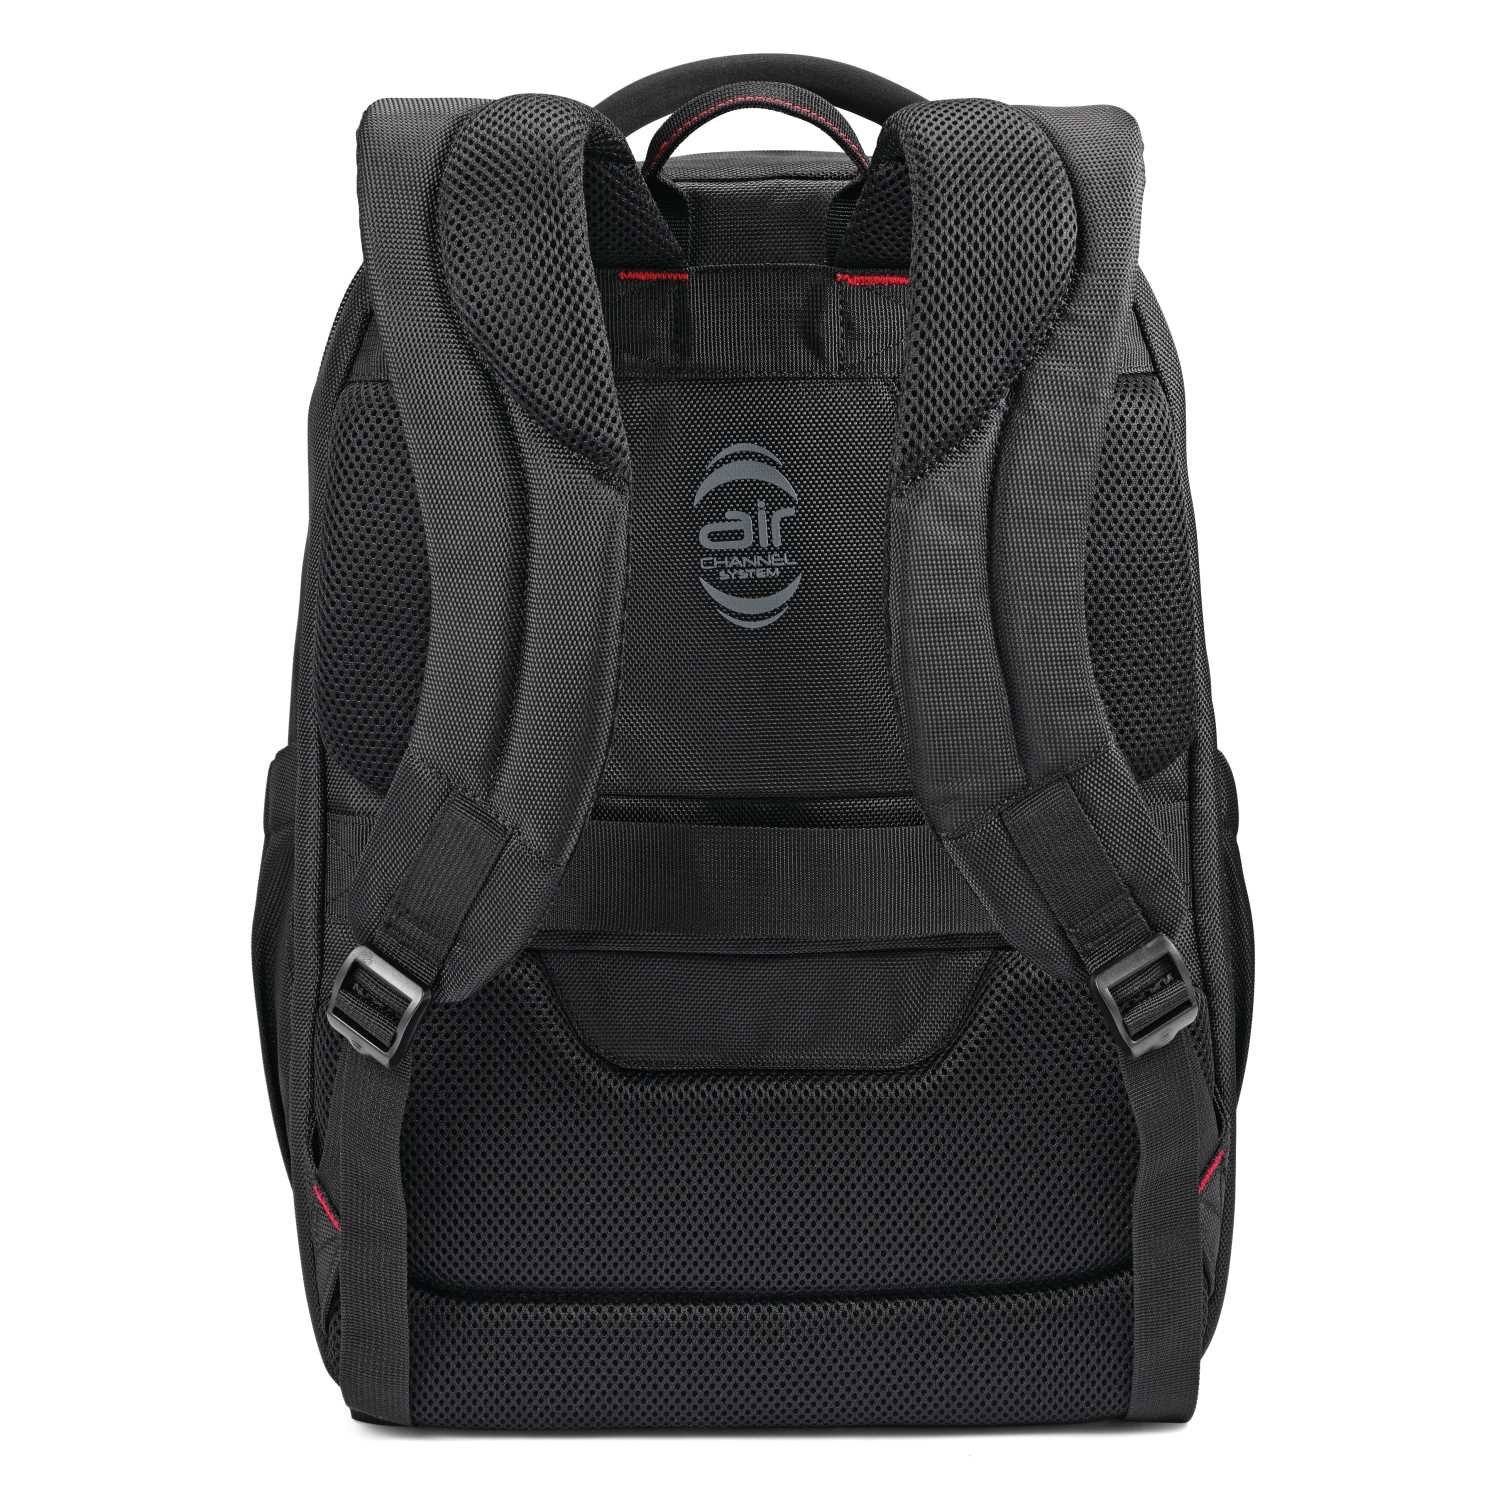 Samsonite Xenon 3.0 Large Backpack - Checkpoint Friendly Business ...